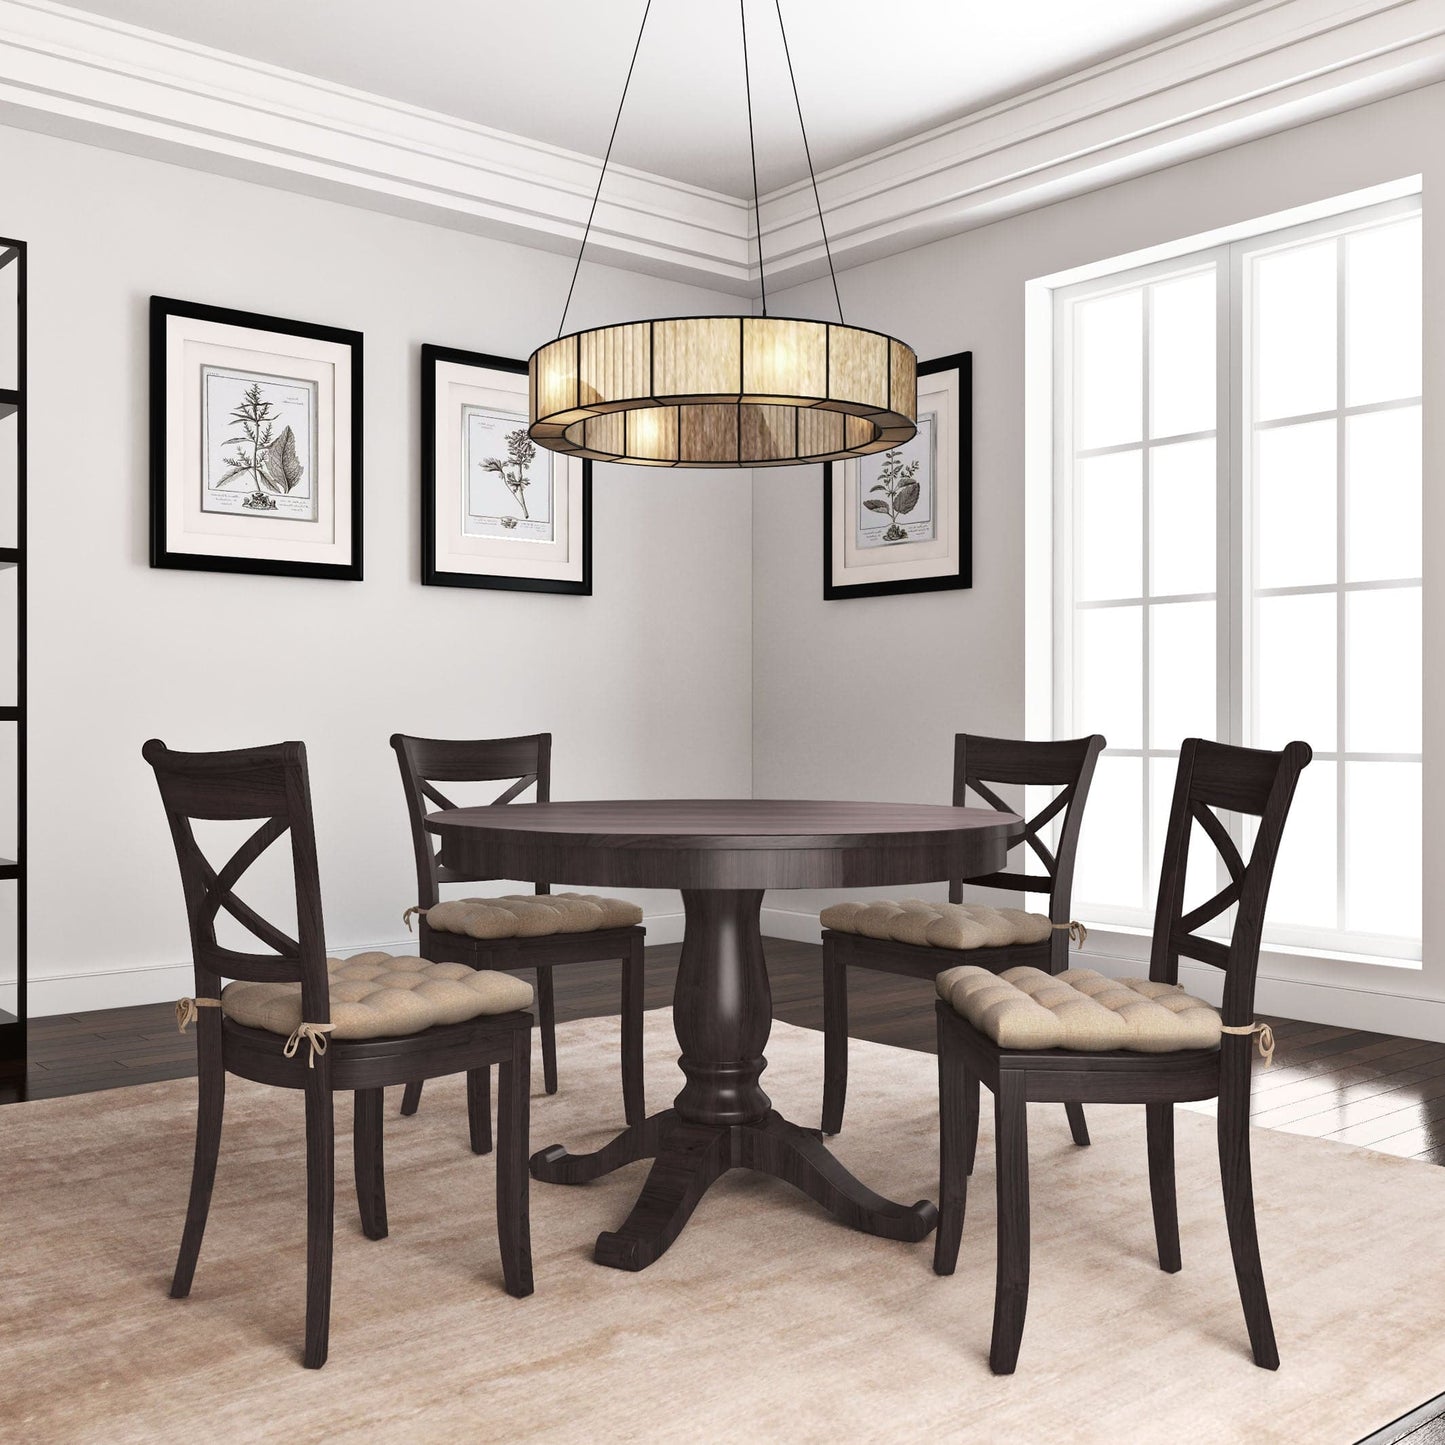 beige dining chair pads on dark wood cross back dining chairs in formal dining room